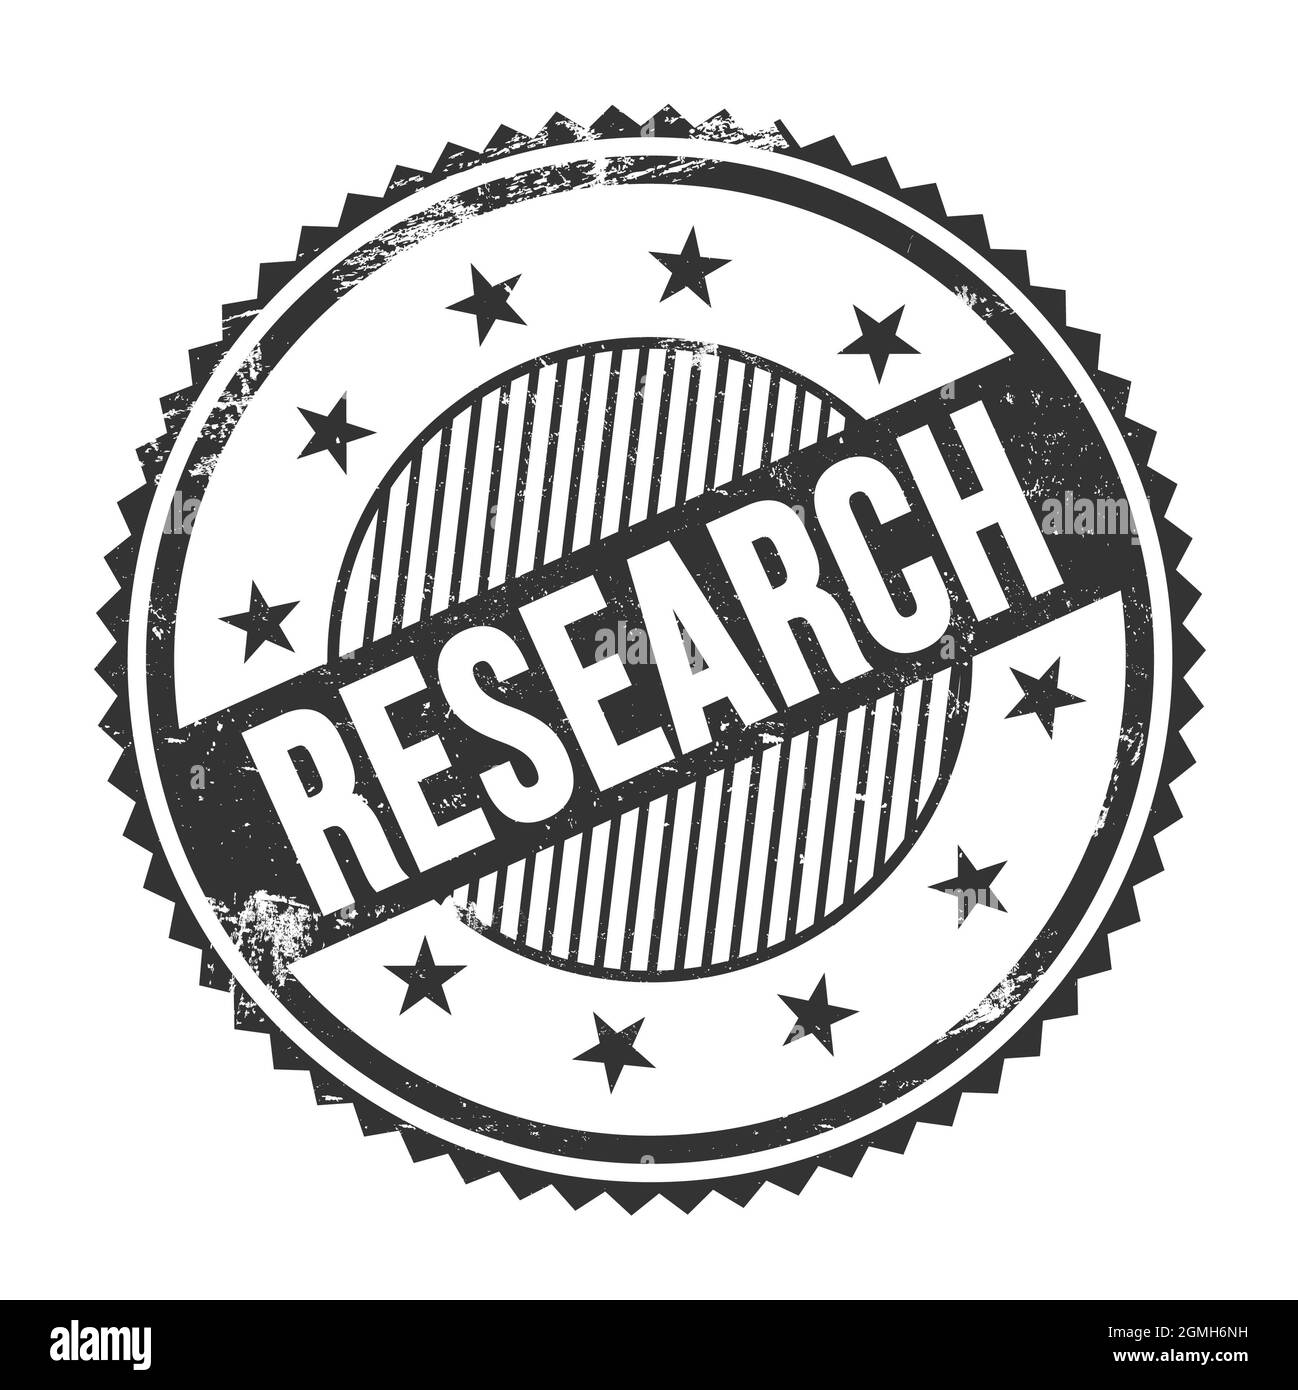 RESEARCH text written on black grungy zig zag borders round stamp. Stock Photo